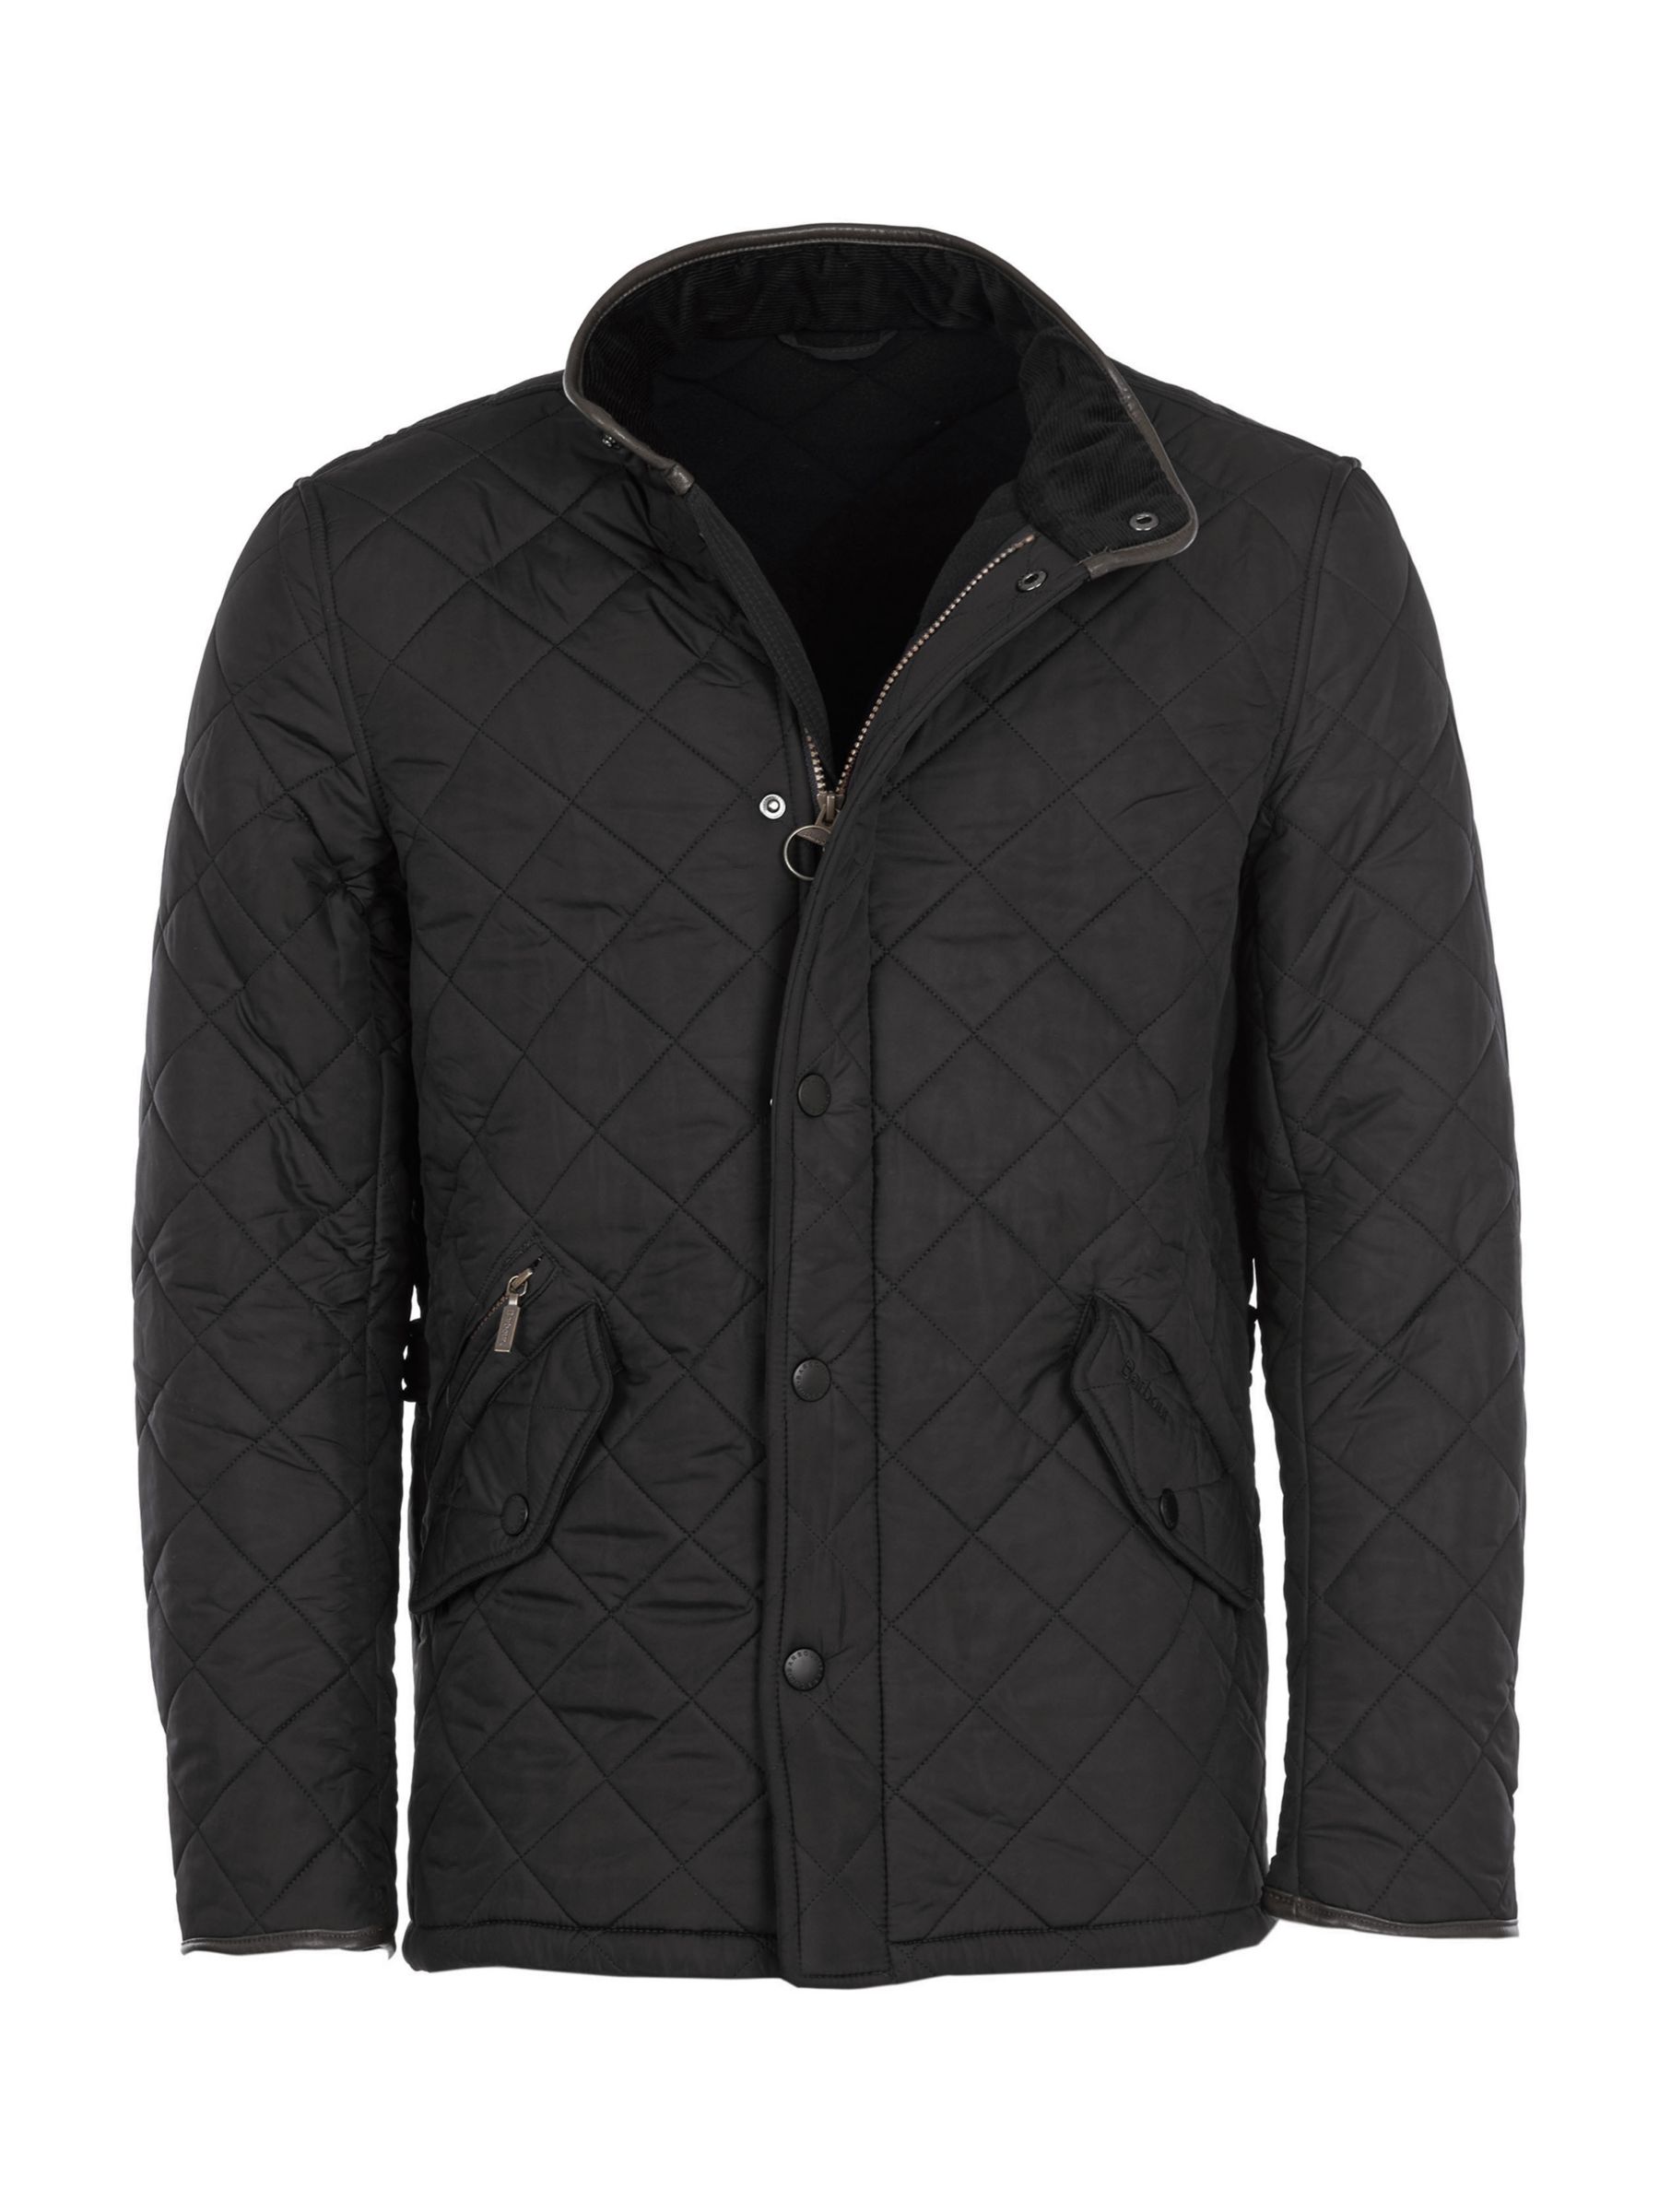 Barbour Powell Quilted Jacket, Black, M